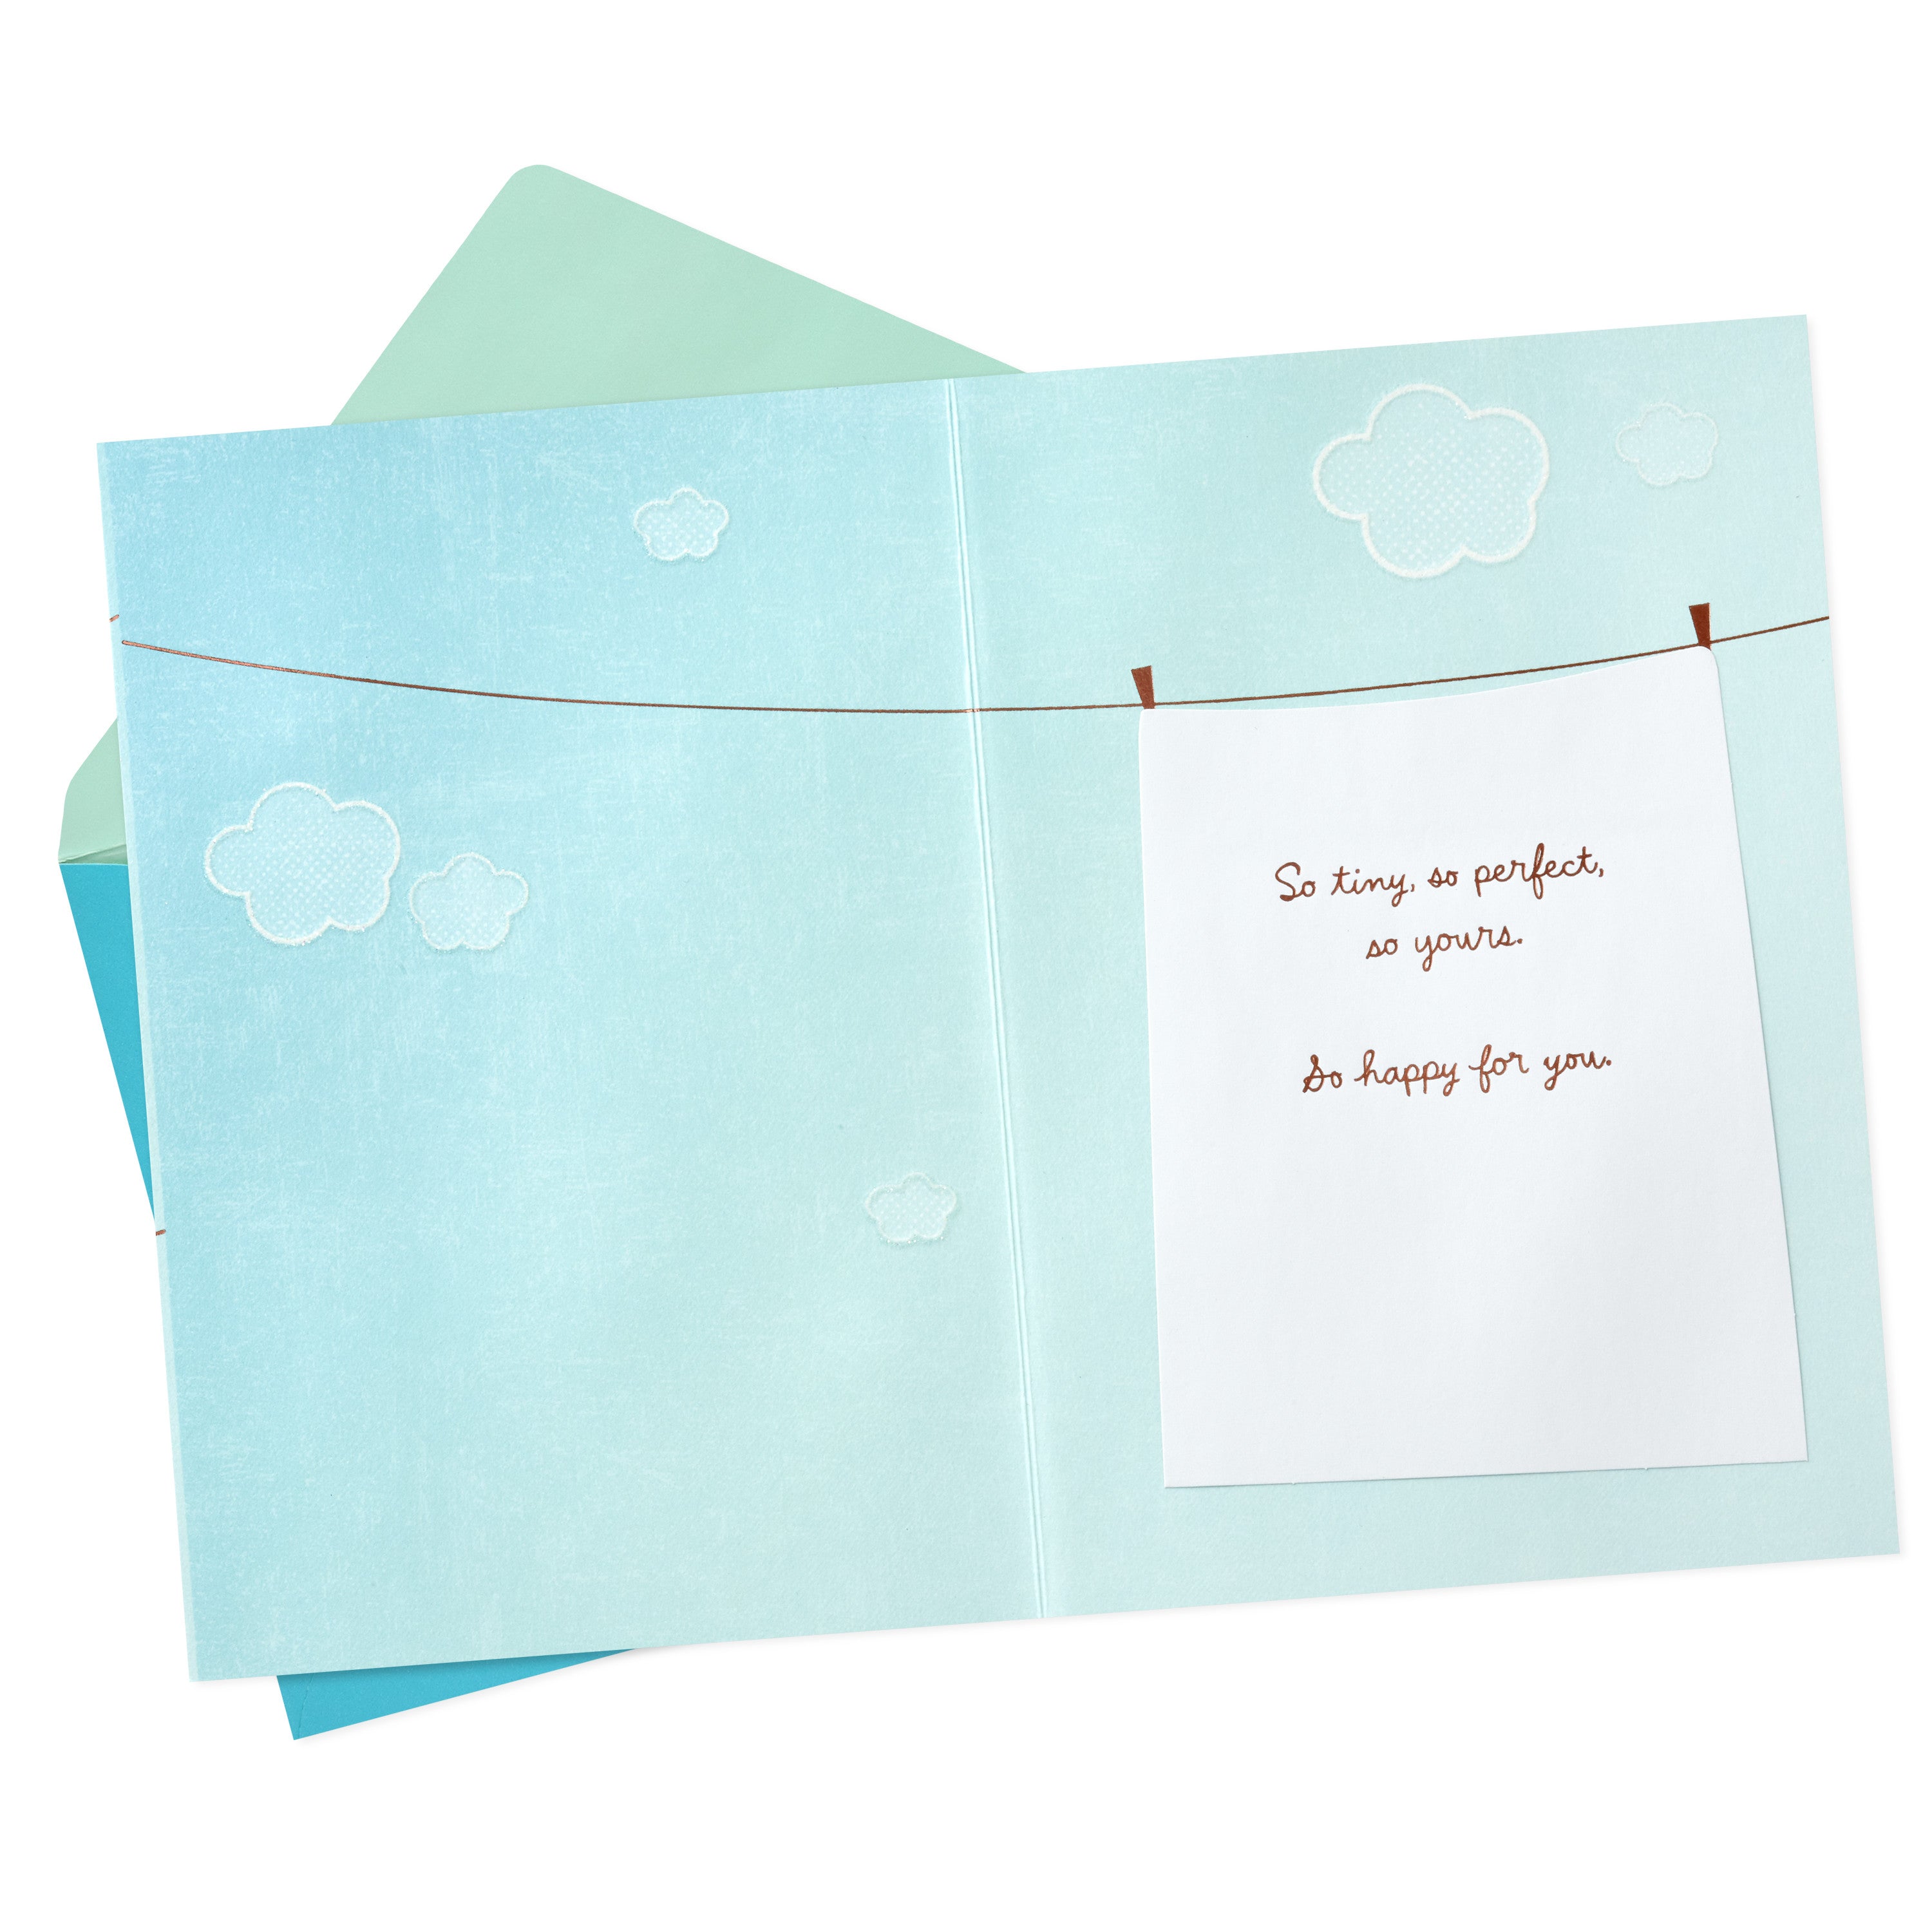 Baby Shower Card (Blue, Now This is Cuteness)